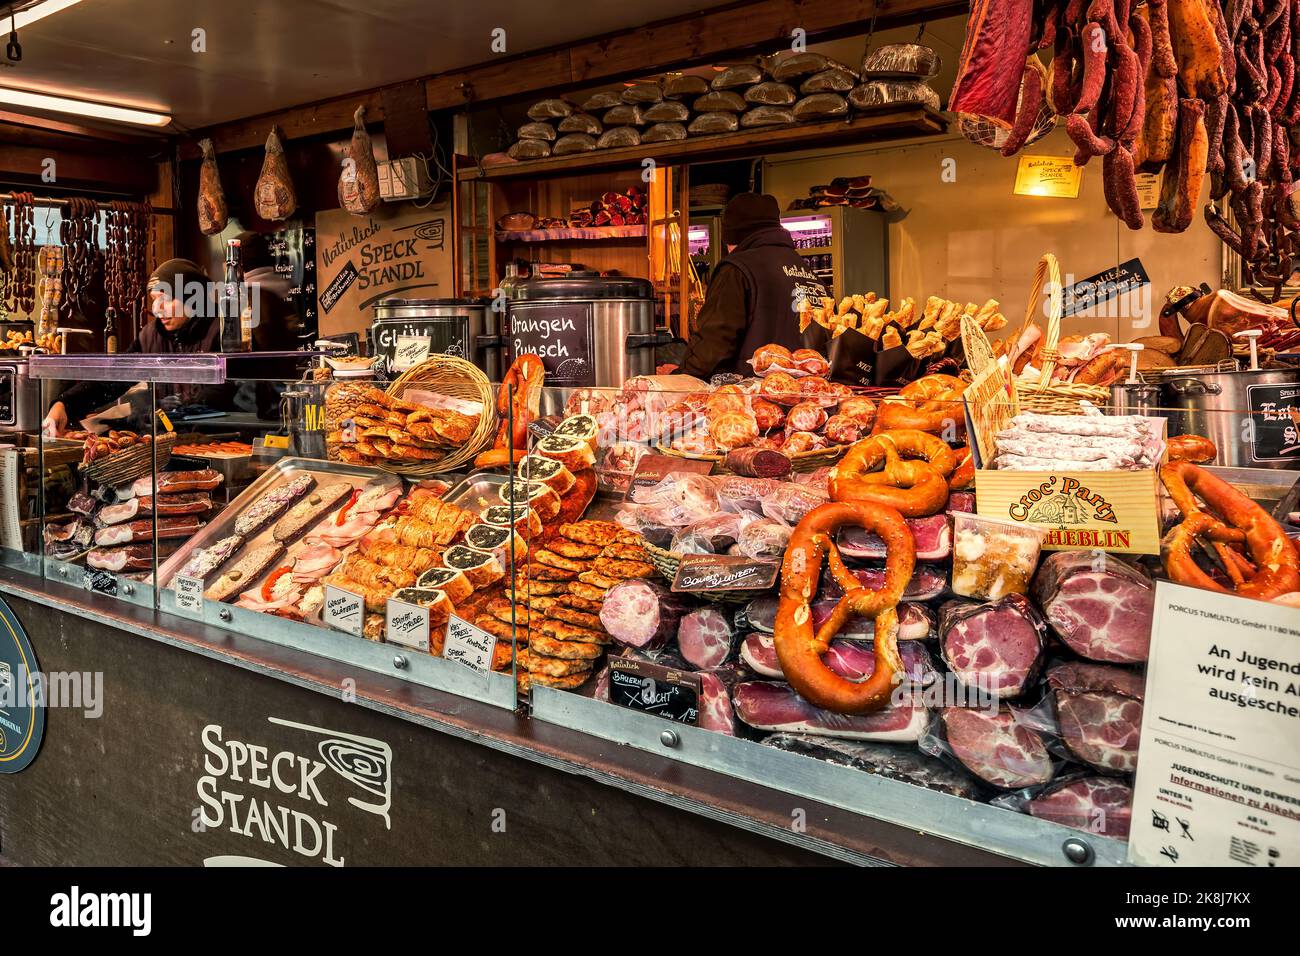 Kiosk with different types of smoked and cured meat along with traditional bakery products during famous Christmas market in Vienna, Austria. Stock Photo